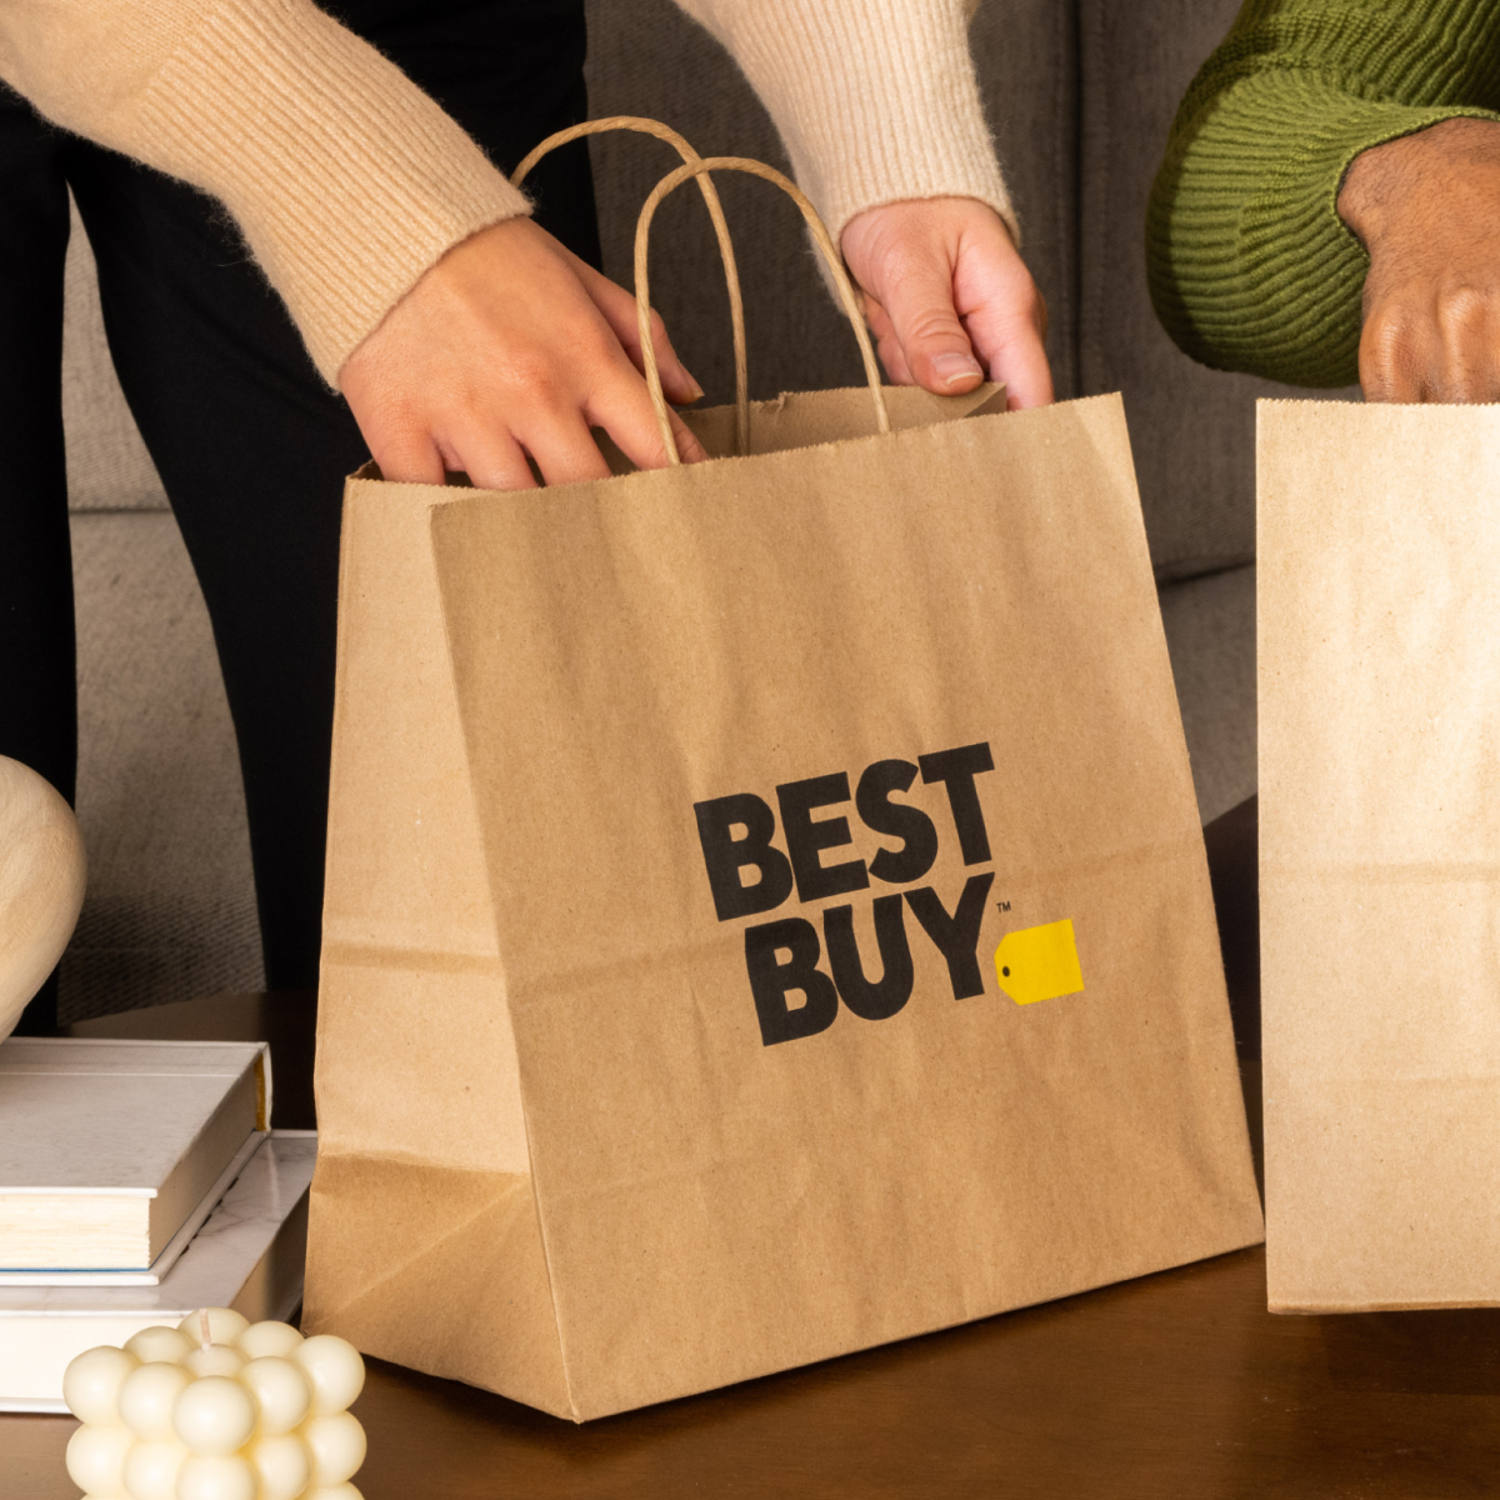 What to shop during Best Buy’s 3-day sale